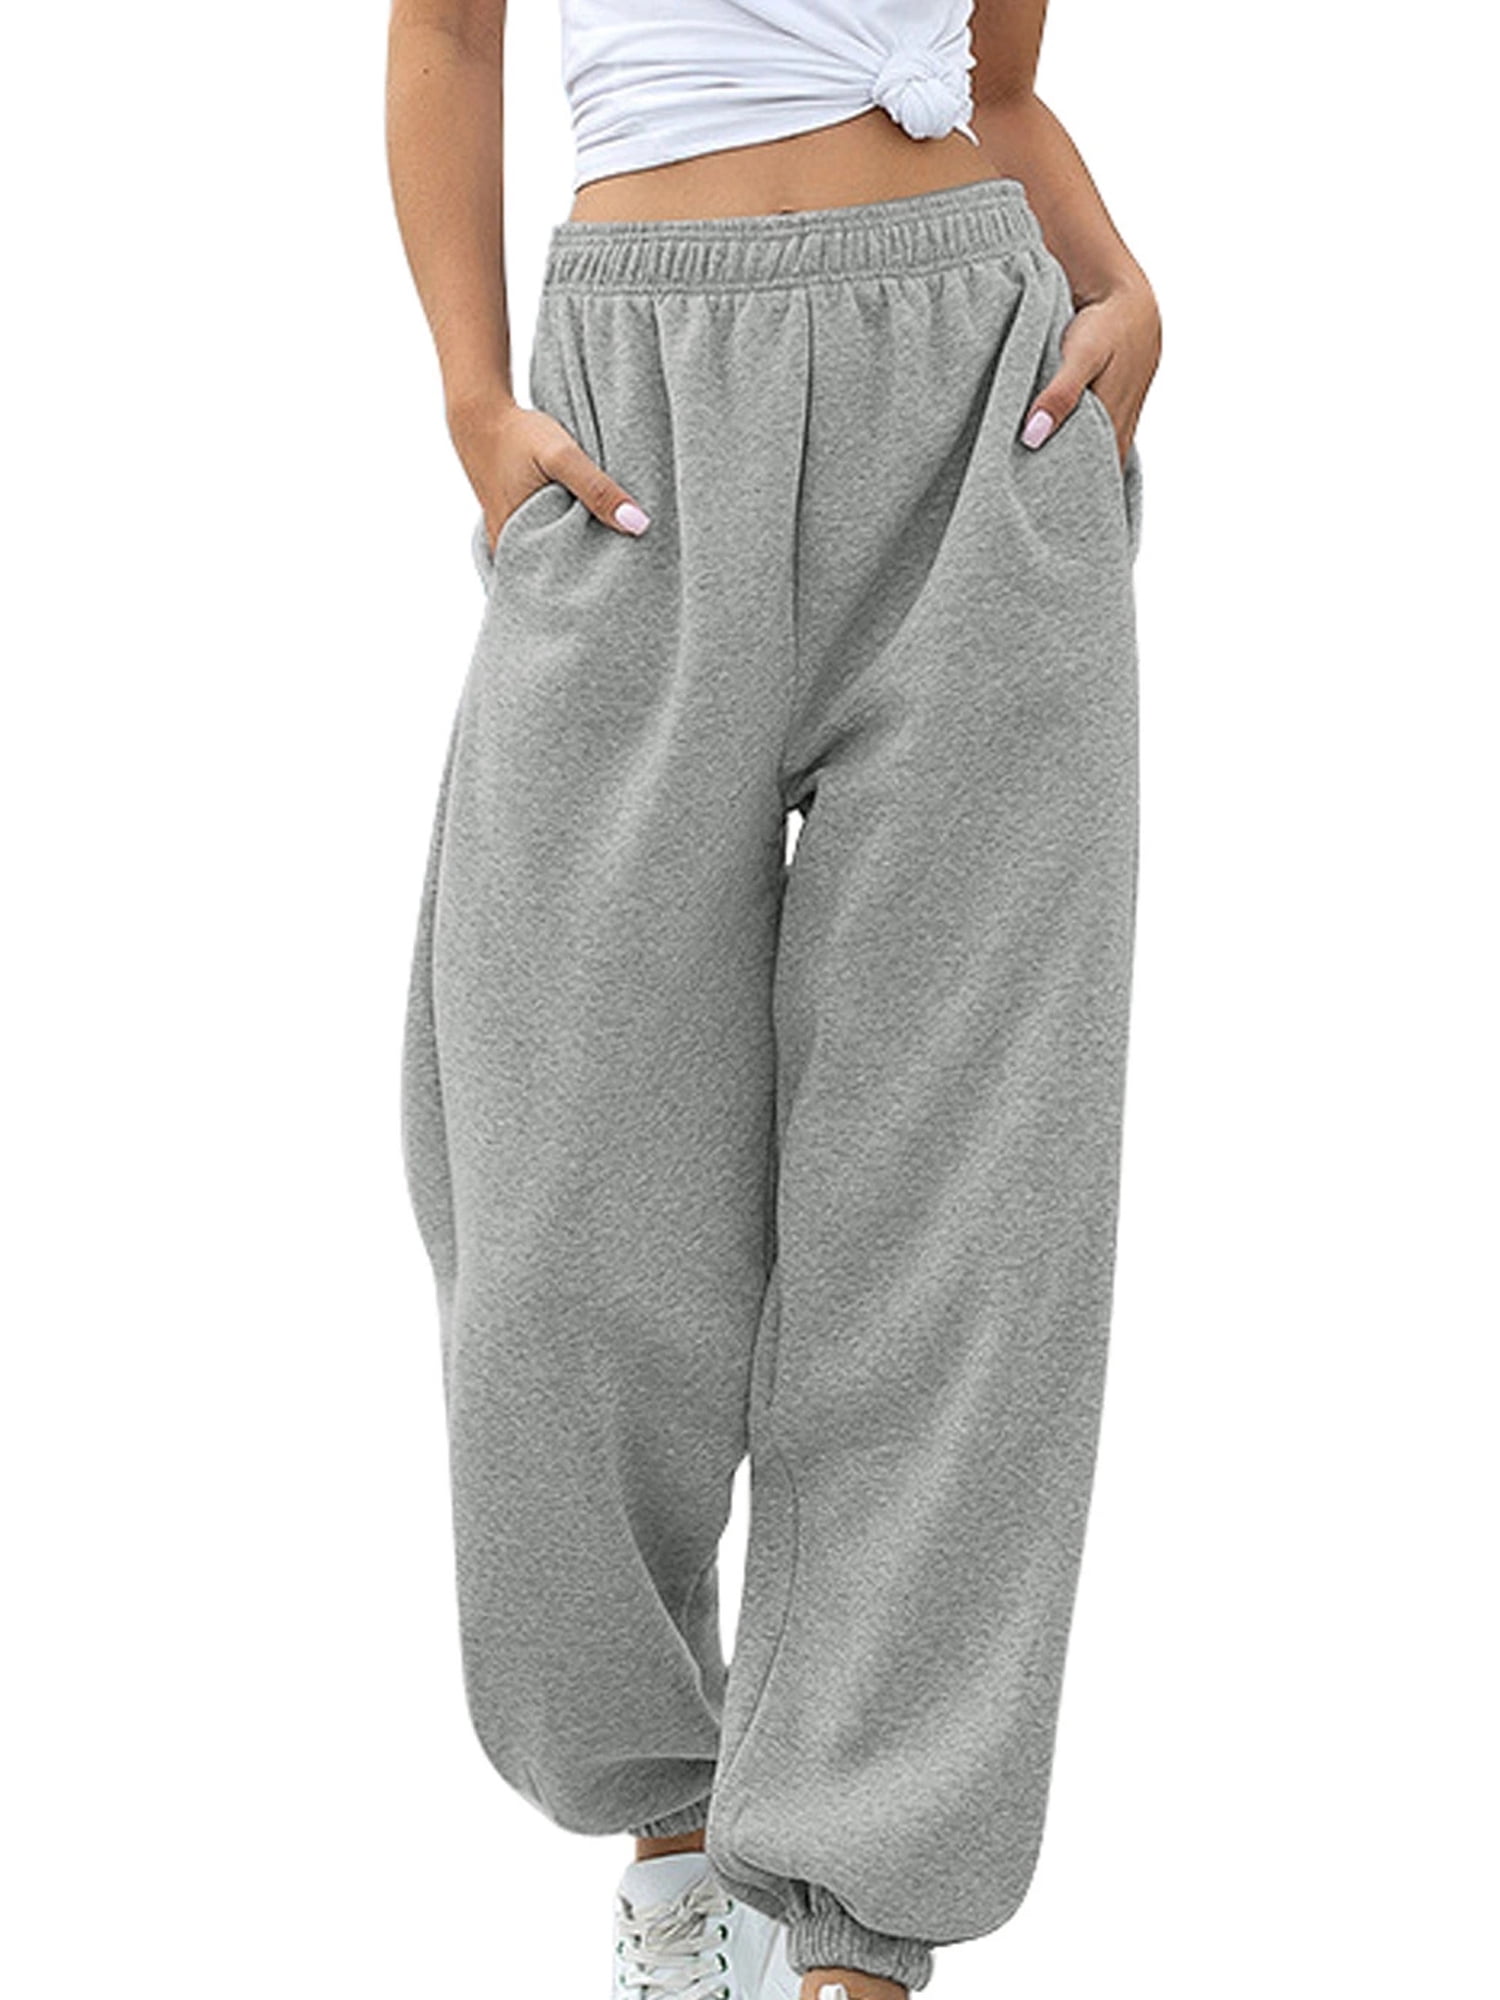 Women's Closed Bottom Sweatpants with Pockets High Waist Workout